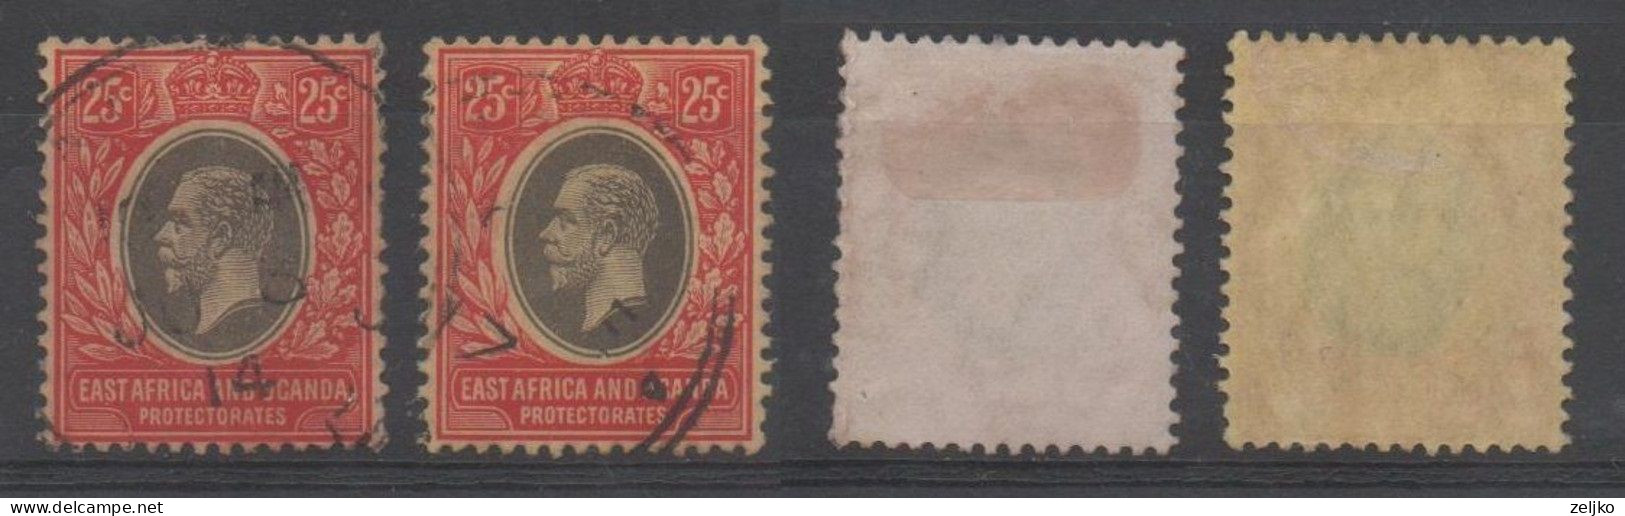 East Africa And Uganda Protectorates, Used, Michel 48, White And Yellow Back Side - Protectorats D'Afrique Orientale Et D'Ouganda